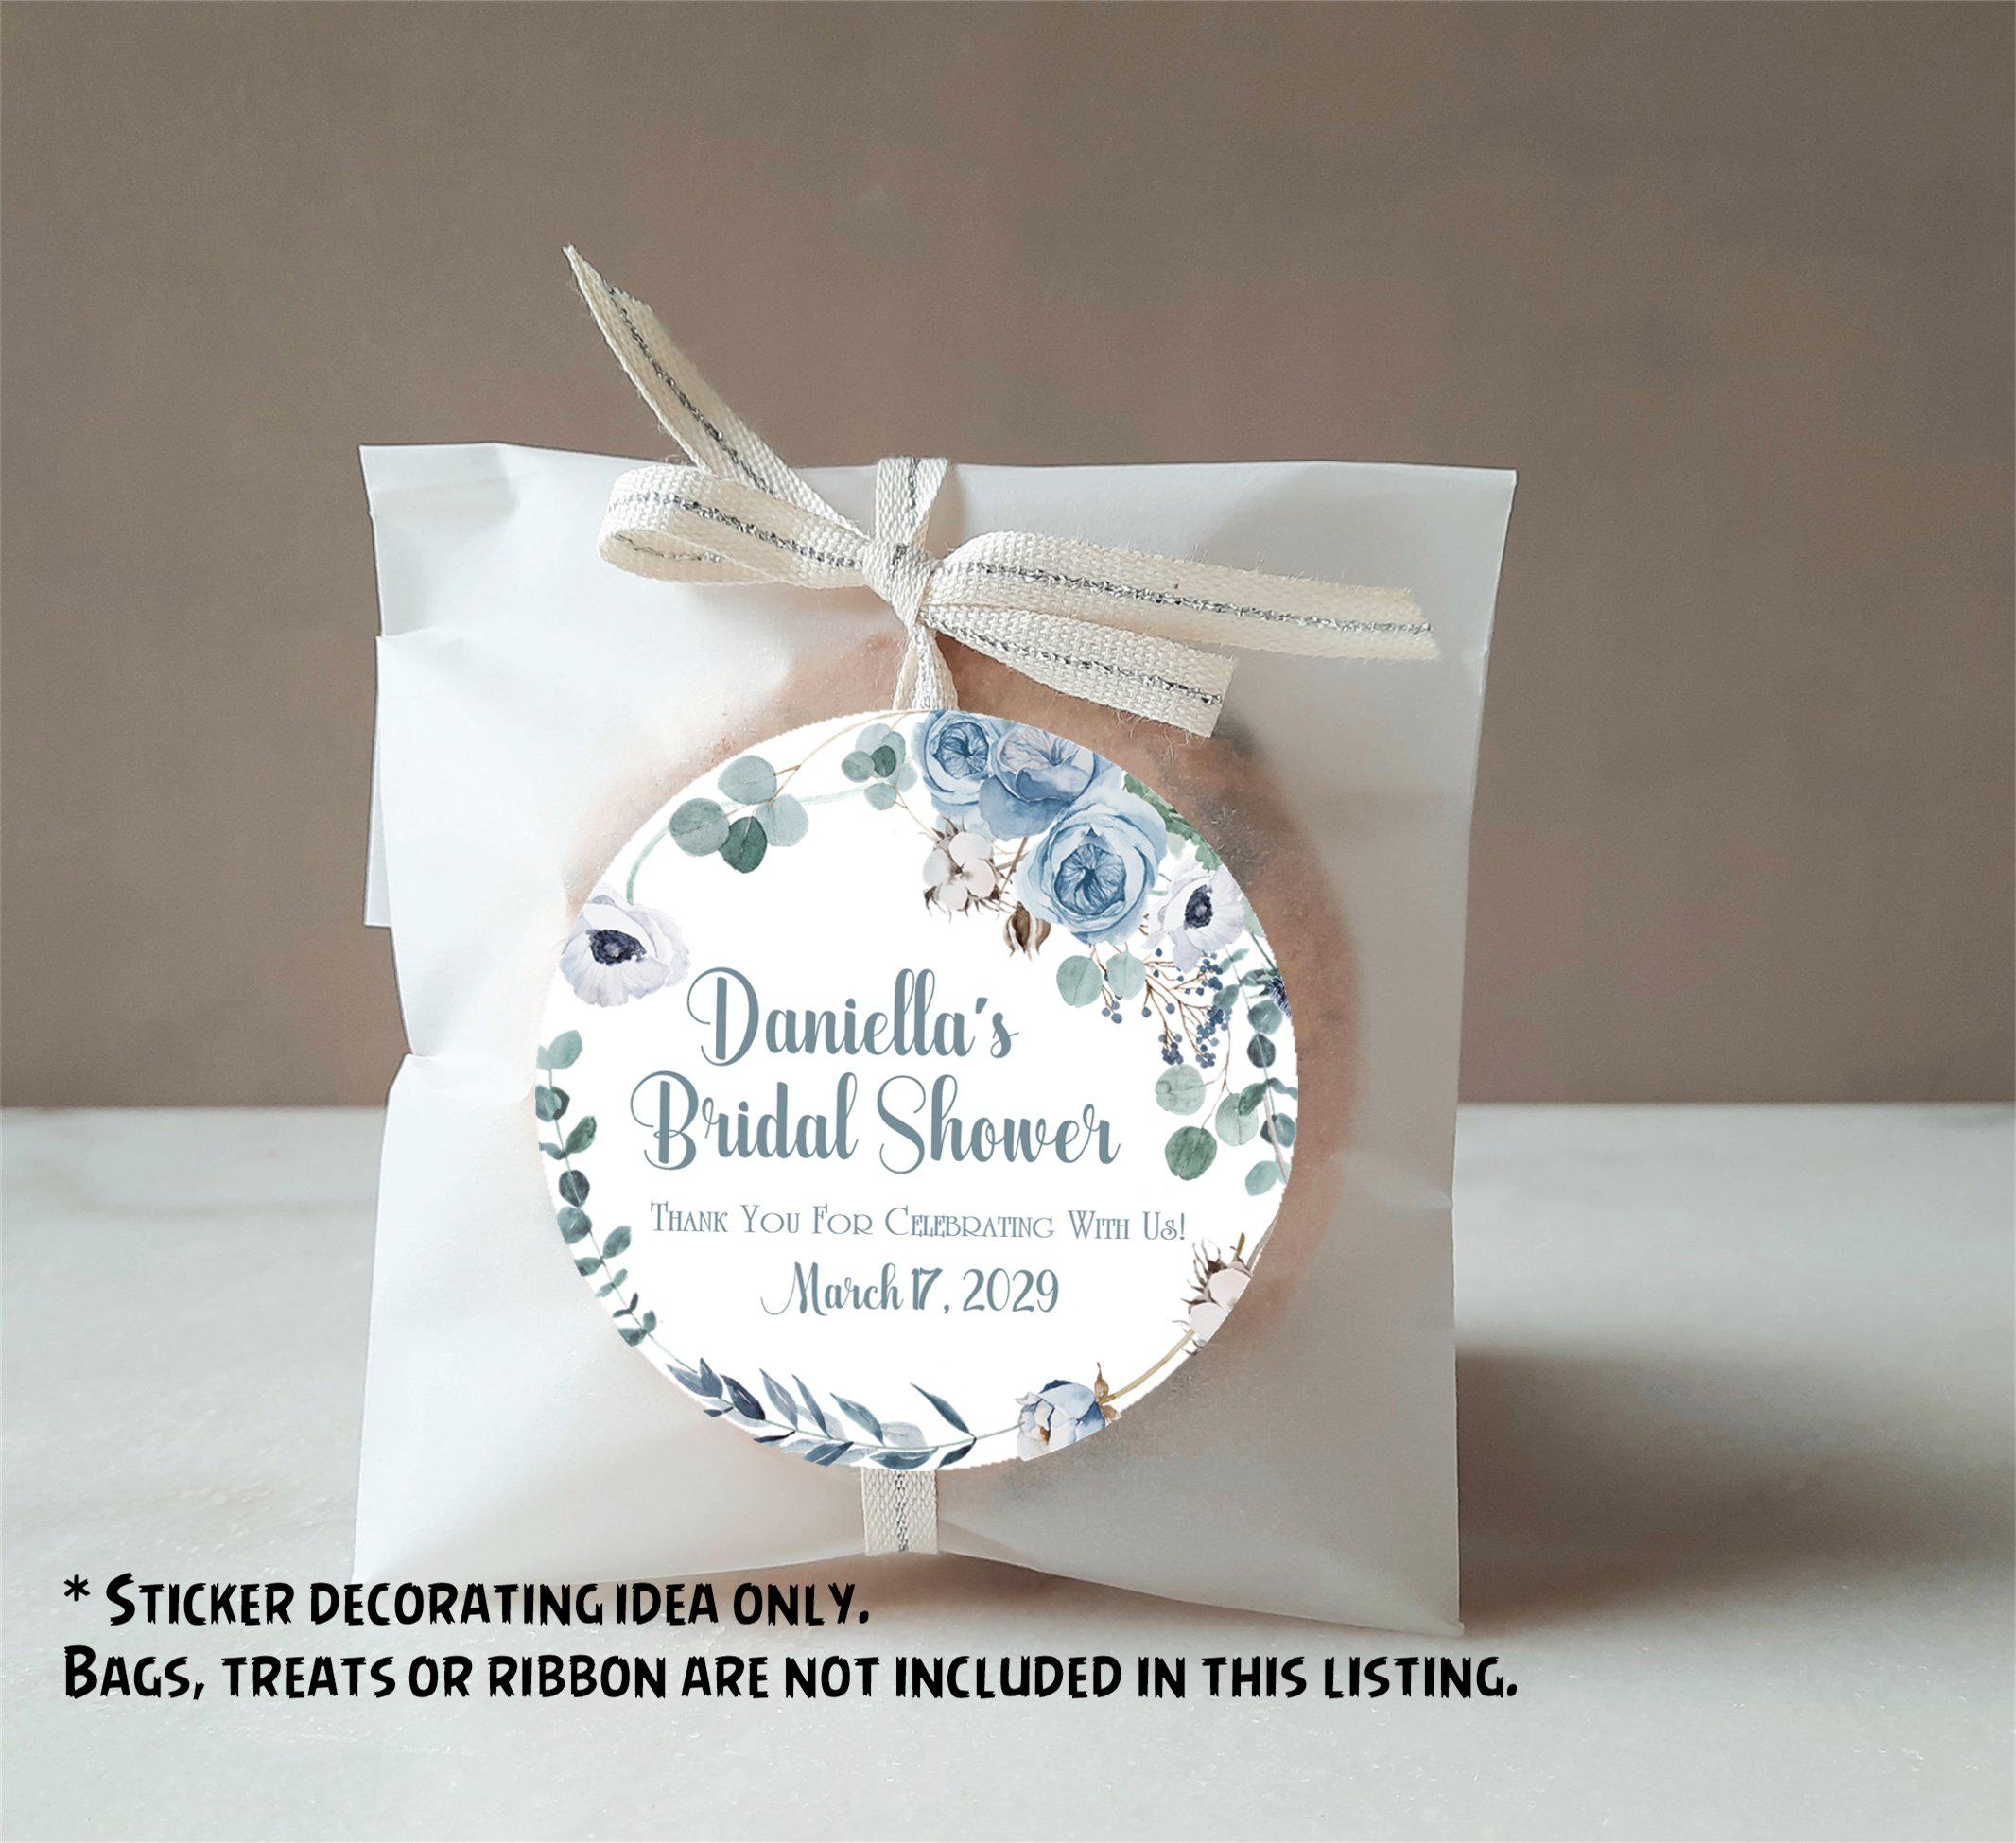 Floral Save the Date Stickers / Labels for Wedding, Birthday, Showers for  Envelopes, Party Favors, Personalize, Clear, White Gloss or Matte 